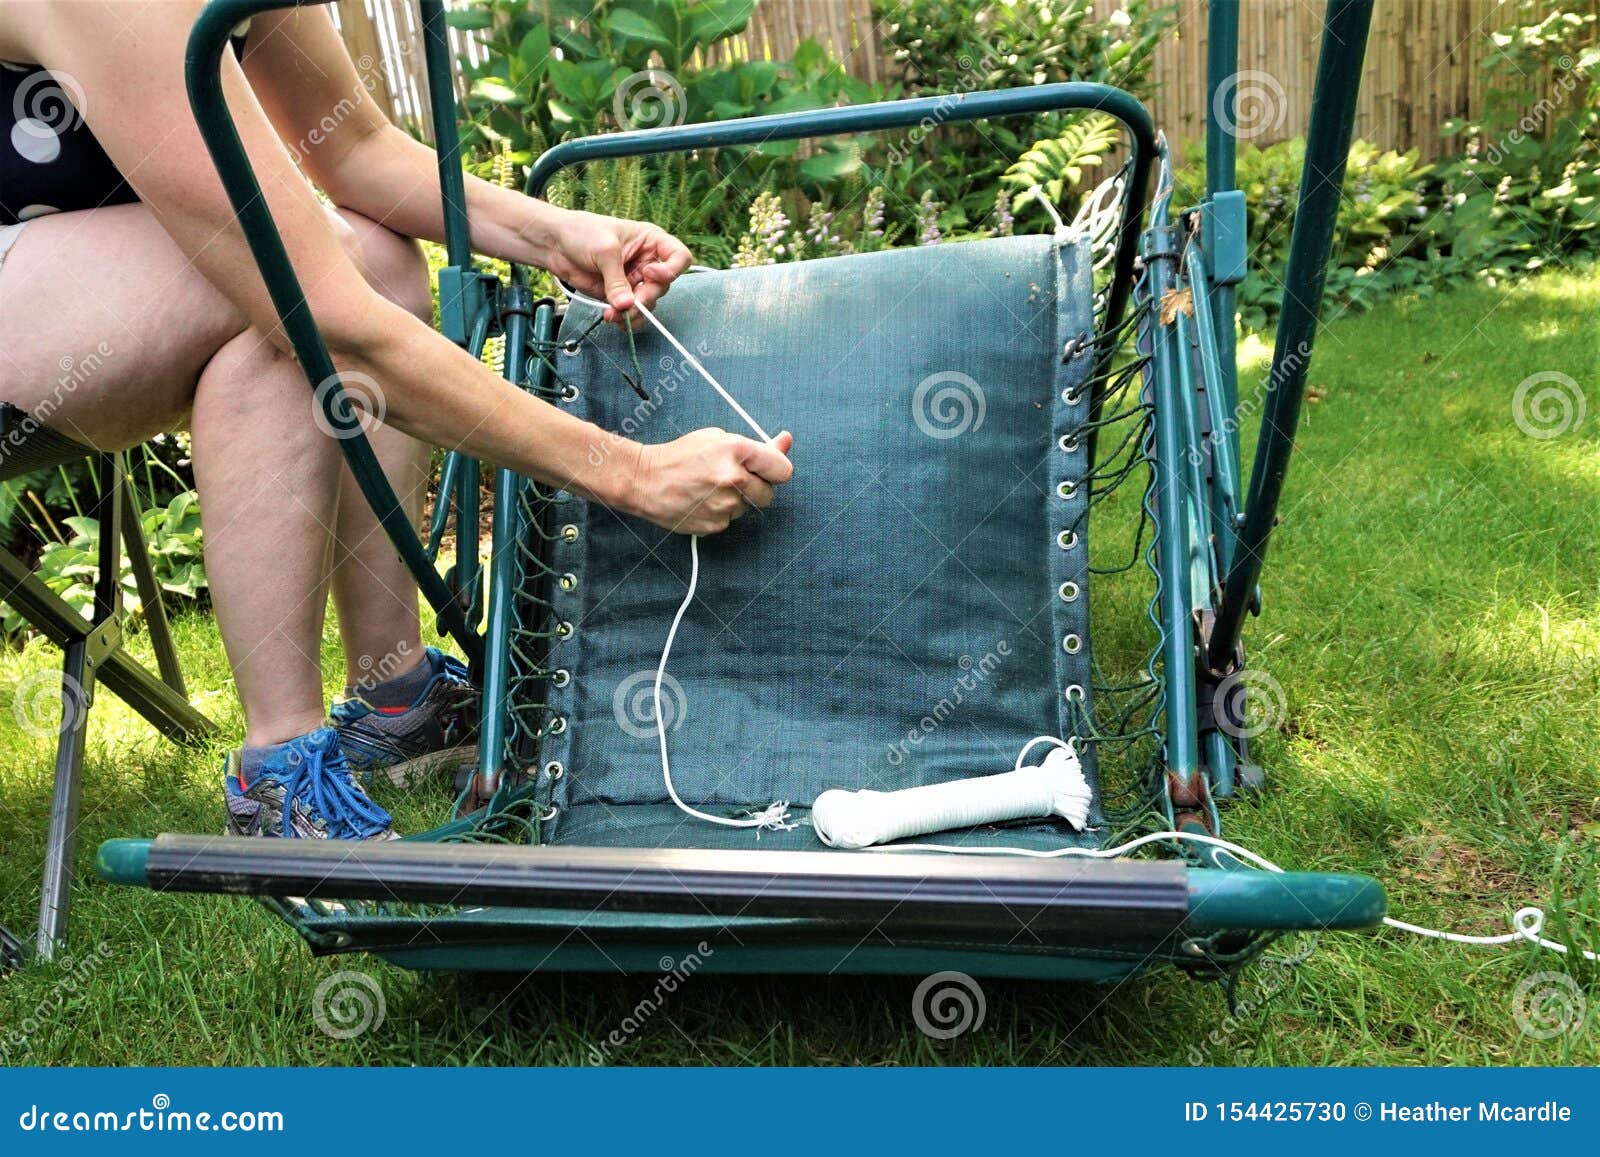 Woman Fixing Lawn Chair Do it Yourself Project on Lawn Stock Photo